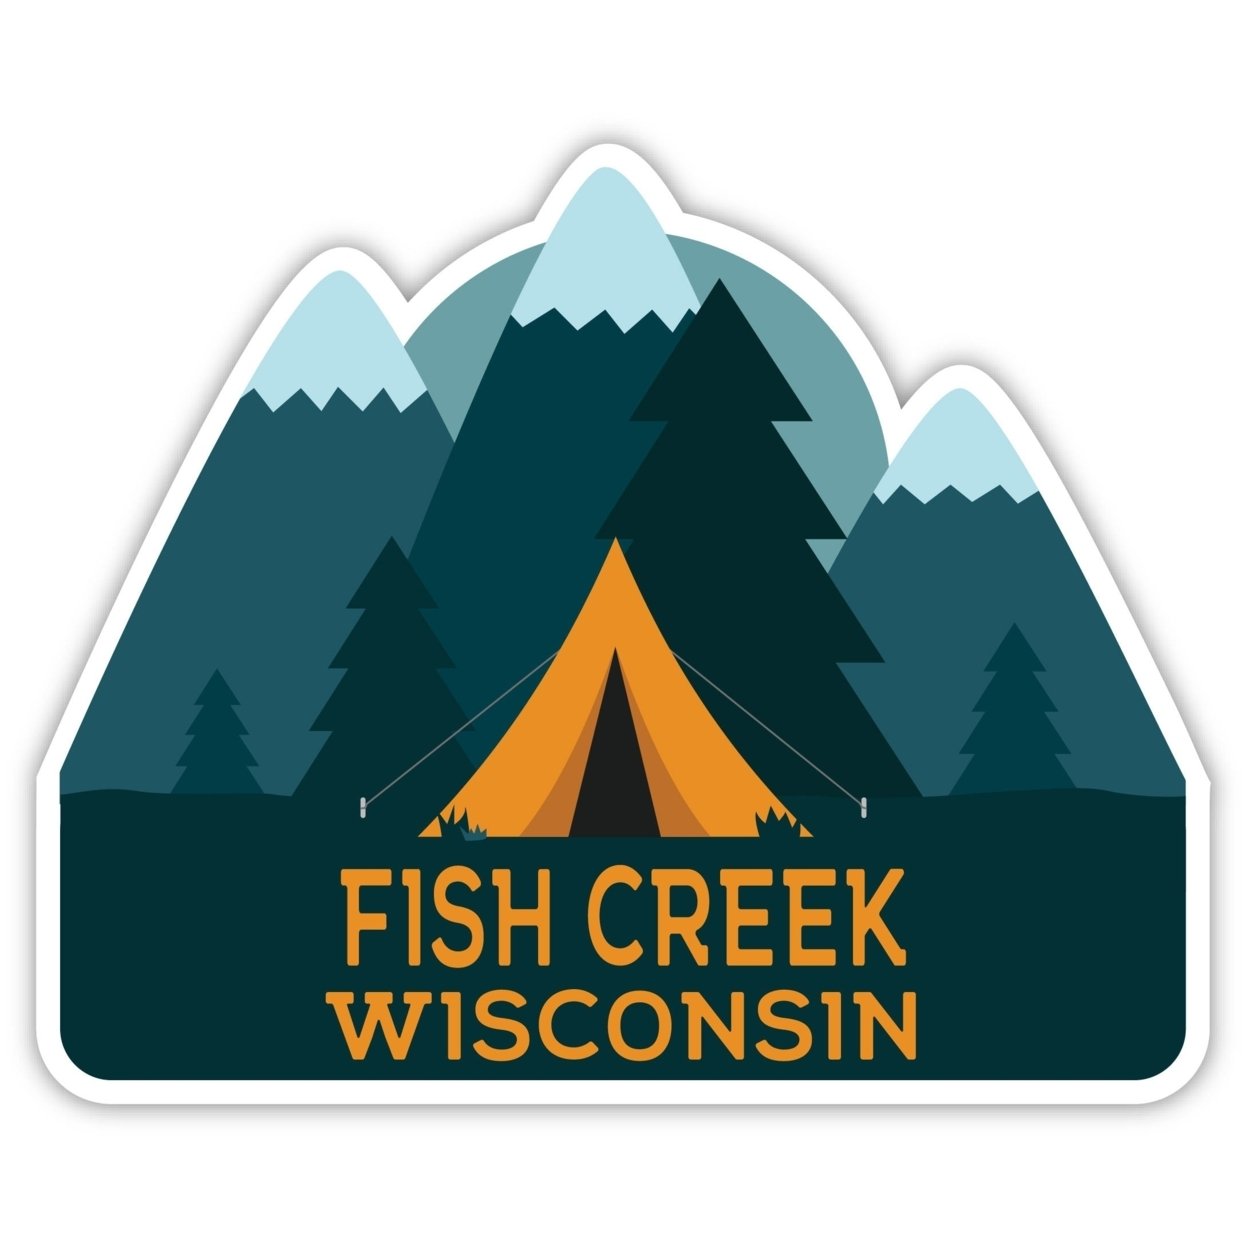 Fish Creek Wisconsin Souvenir Decorative Stickers (Choose Theme And Size) - 4-Pack, 2-Inch, Tent